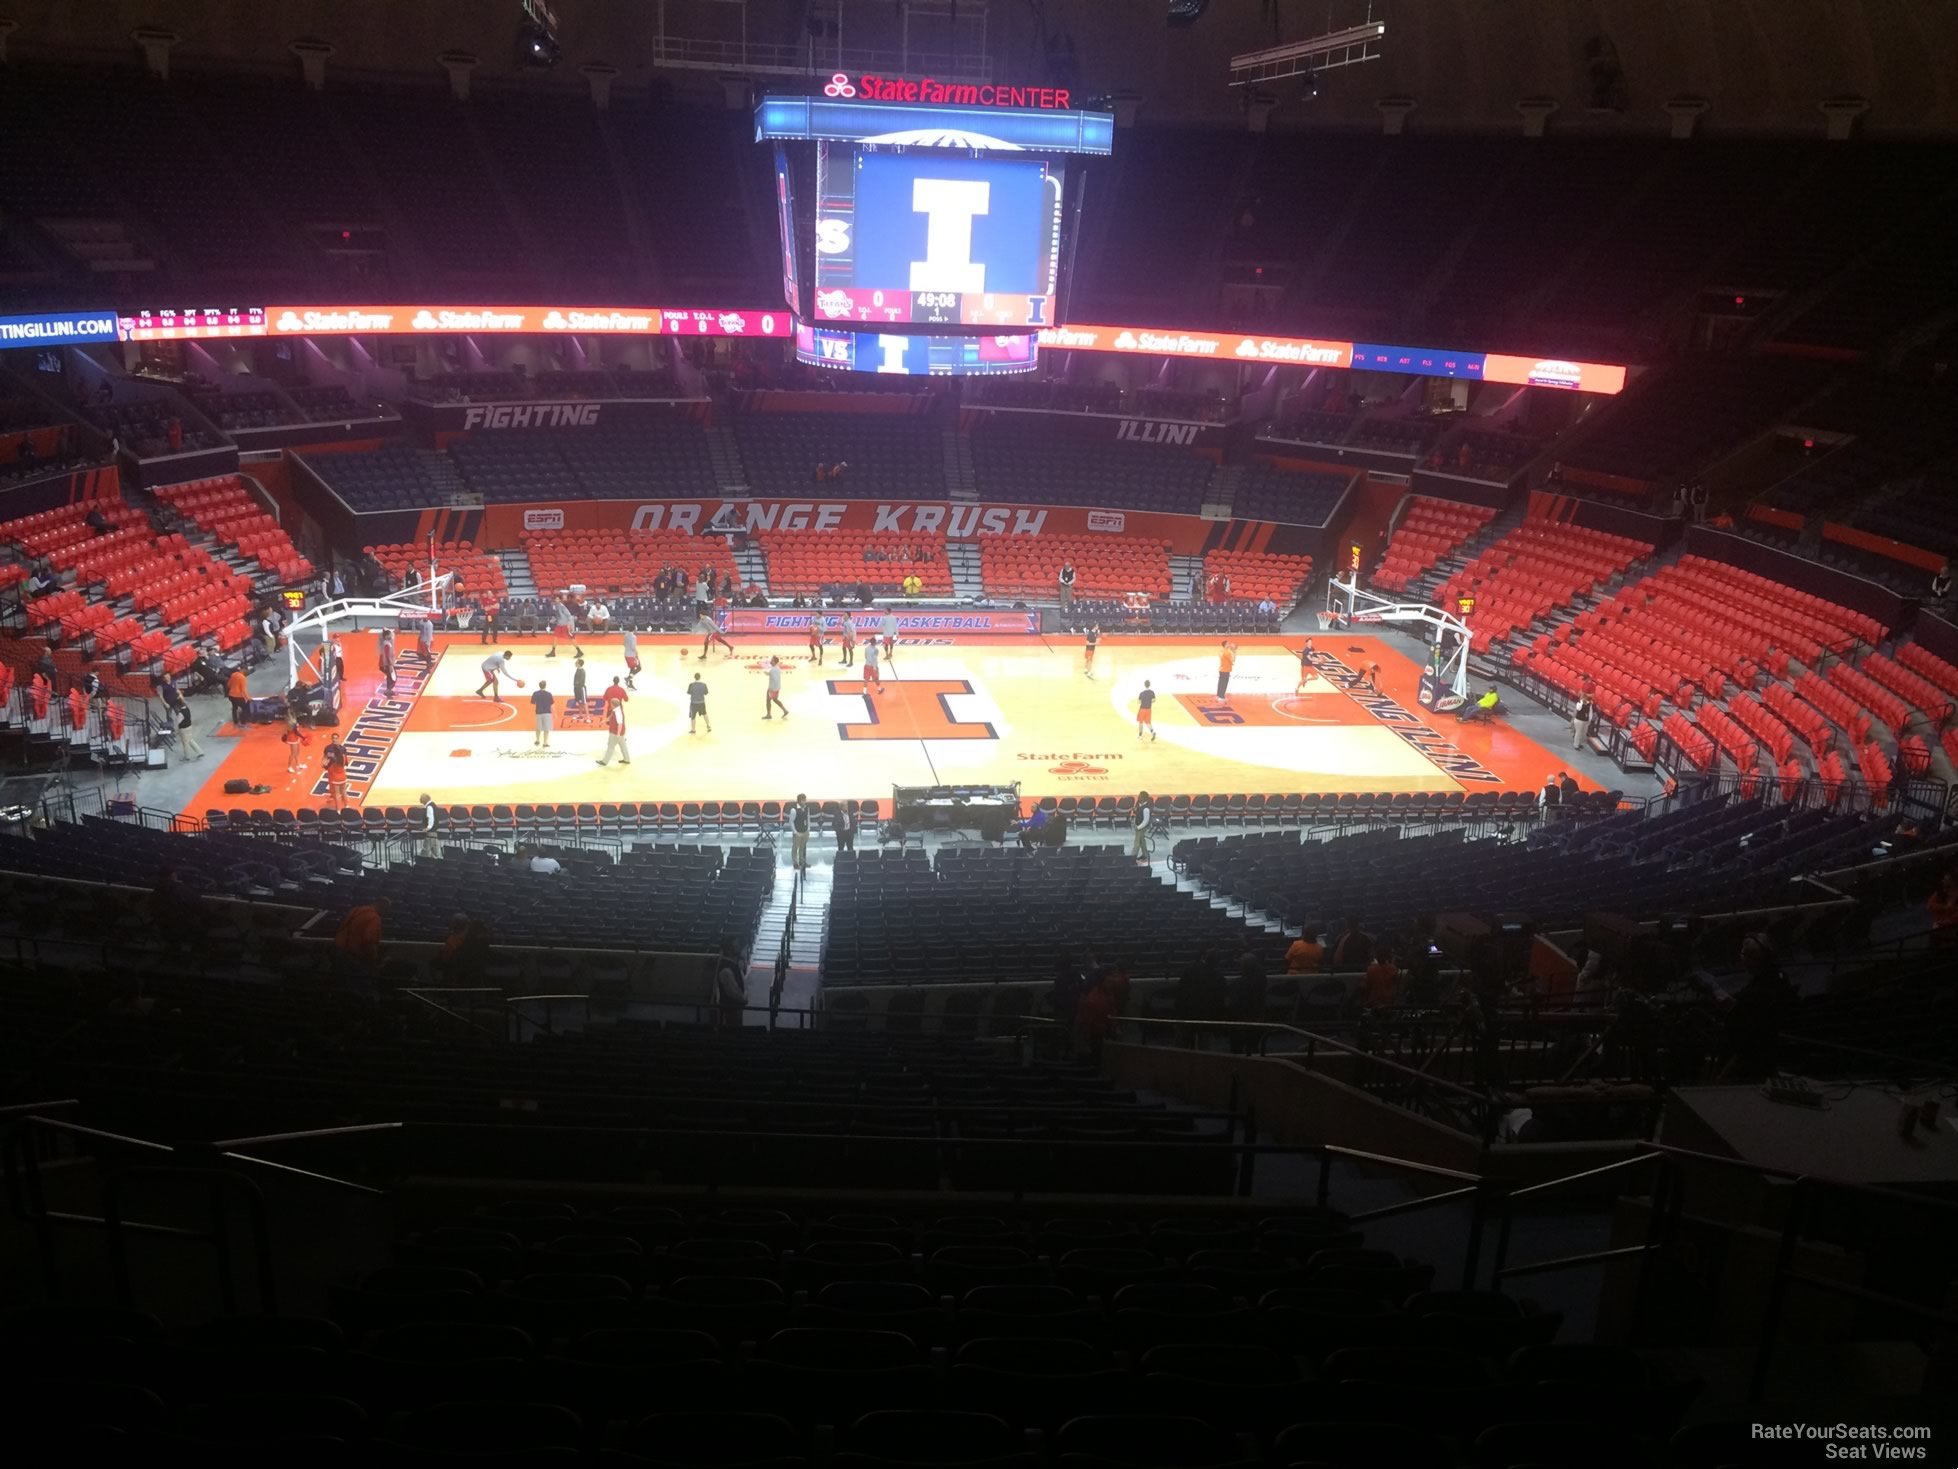 section 202, row 10 seat view  - state farm center